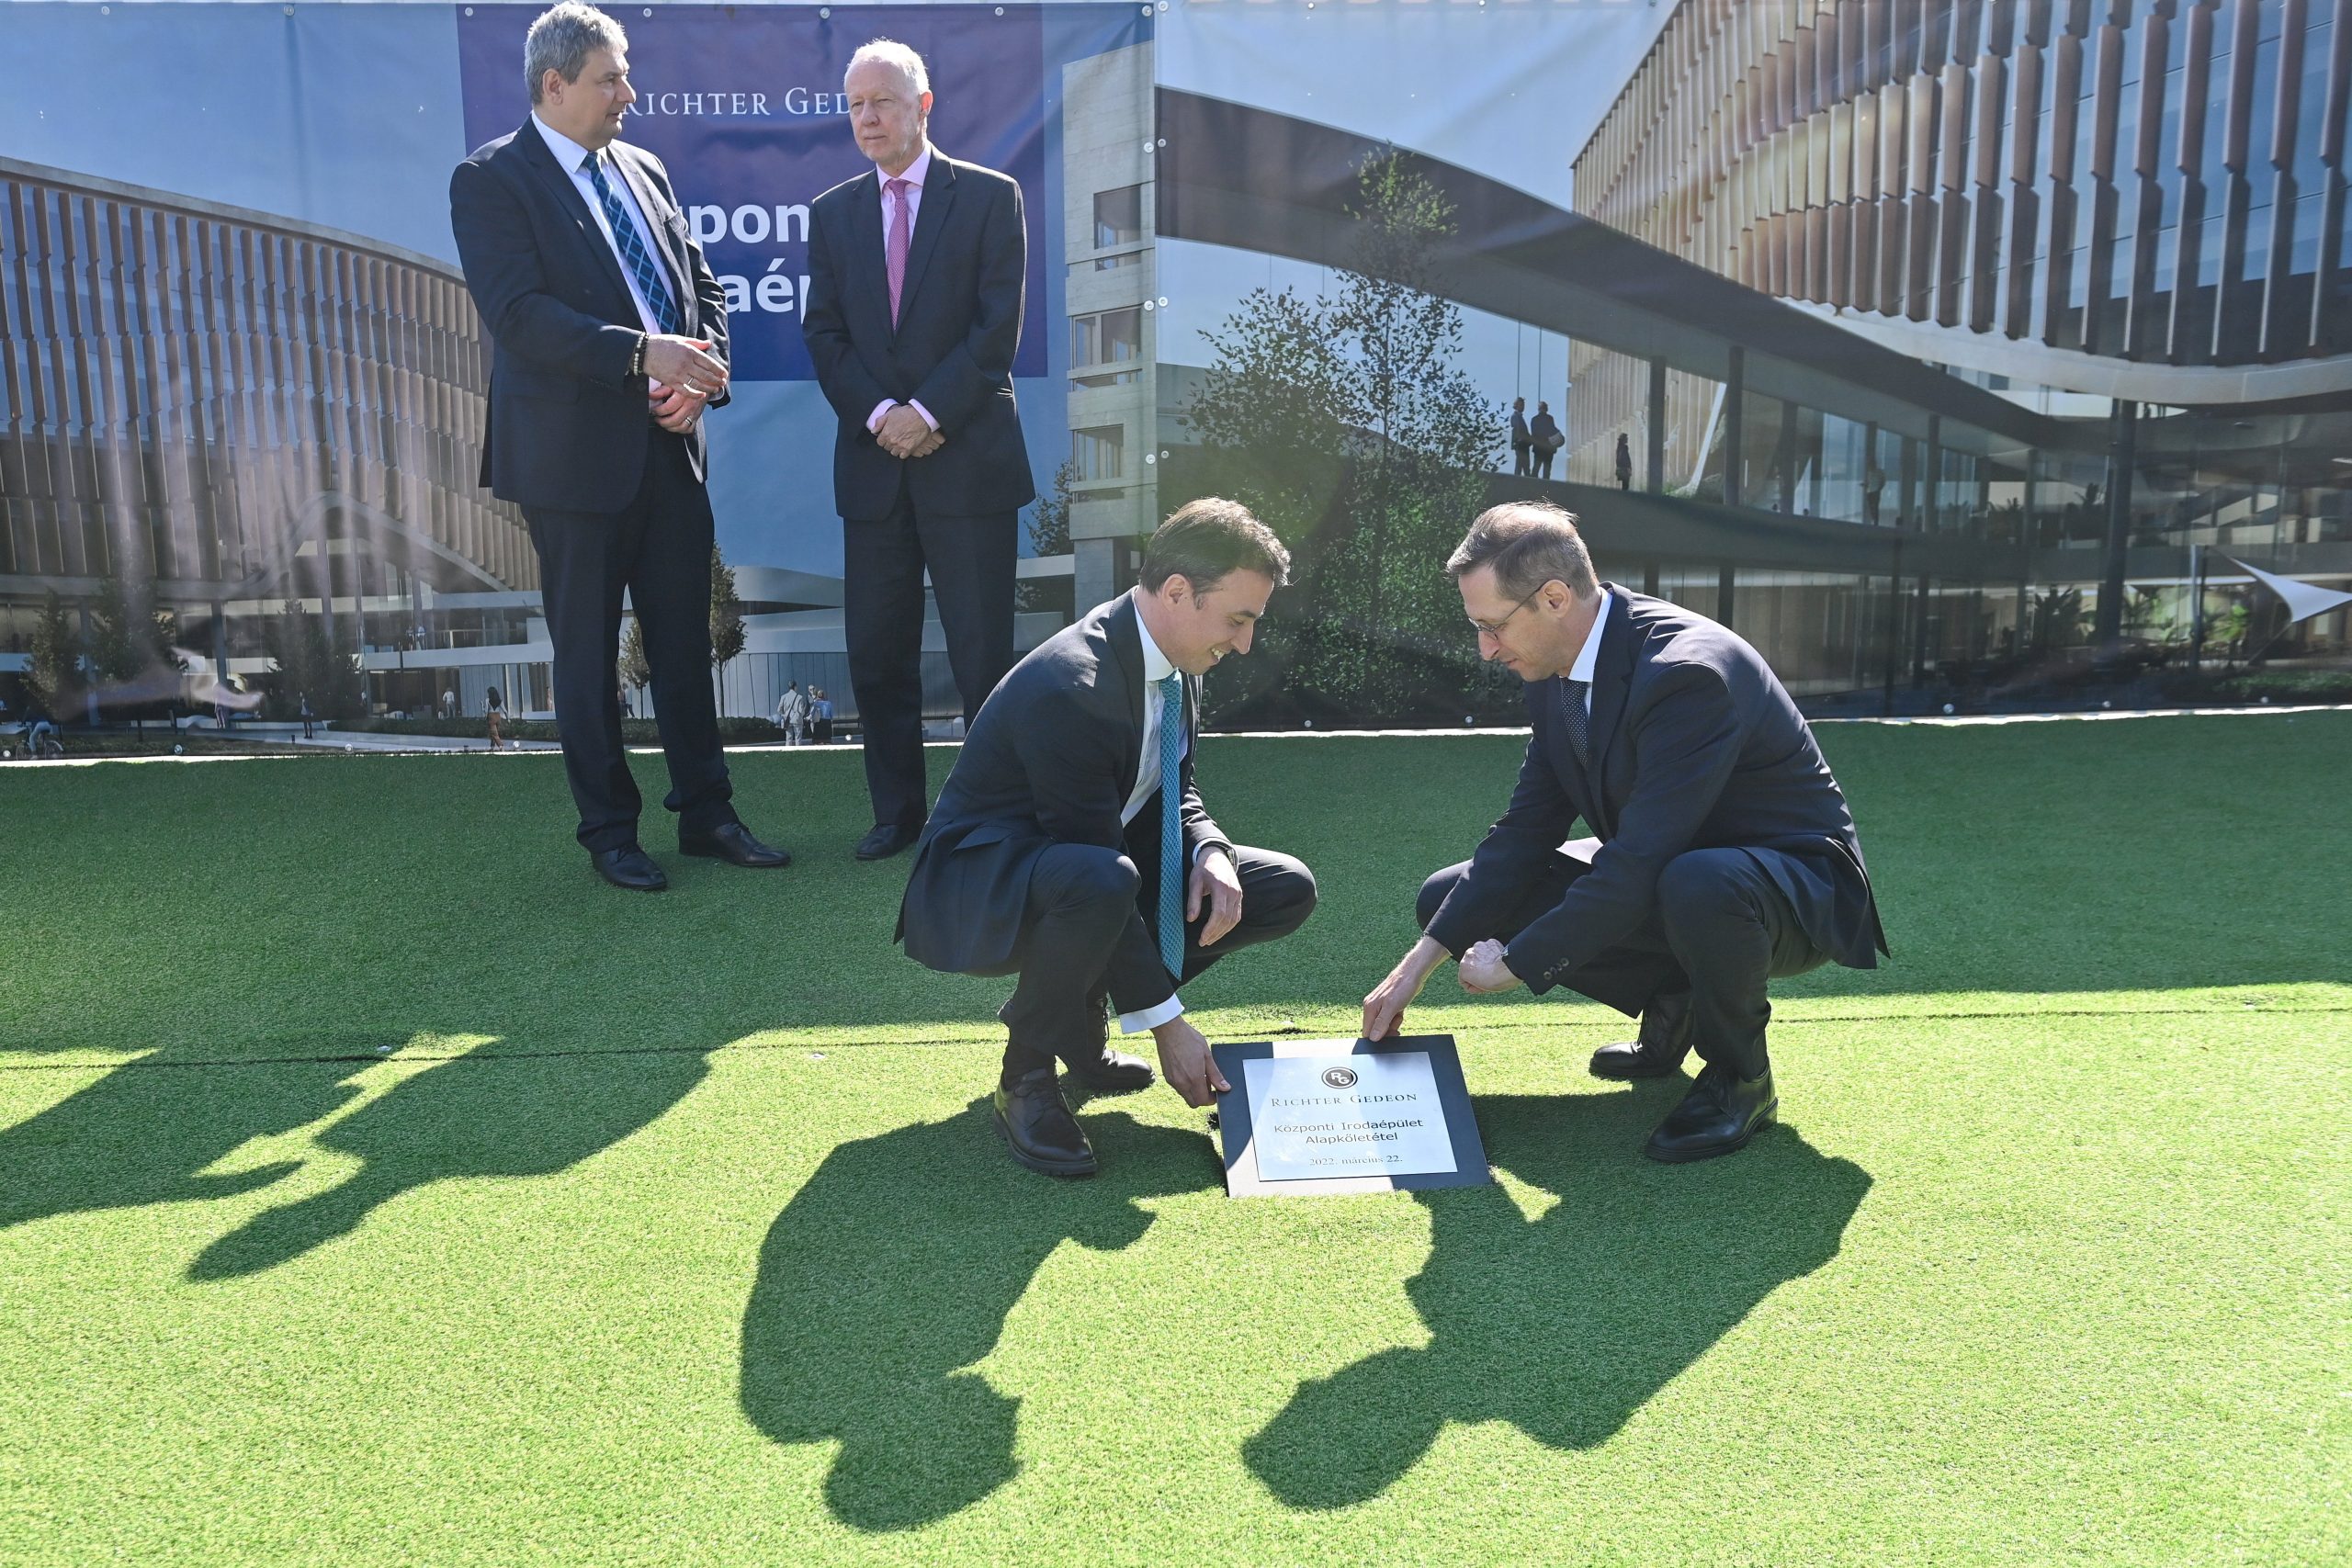 Foundation Stone Laid for Richter’s New Head Office Building